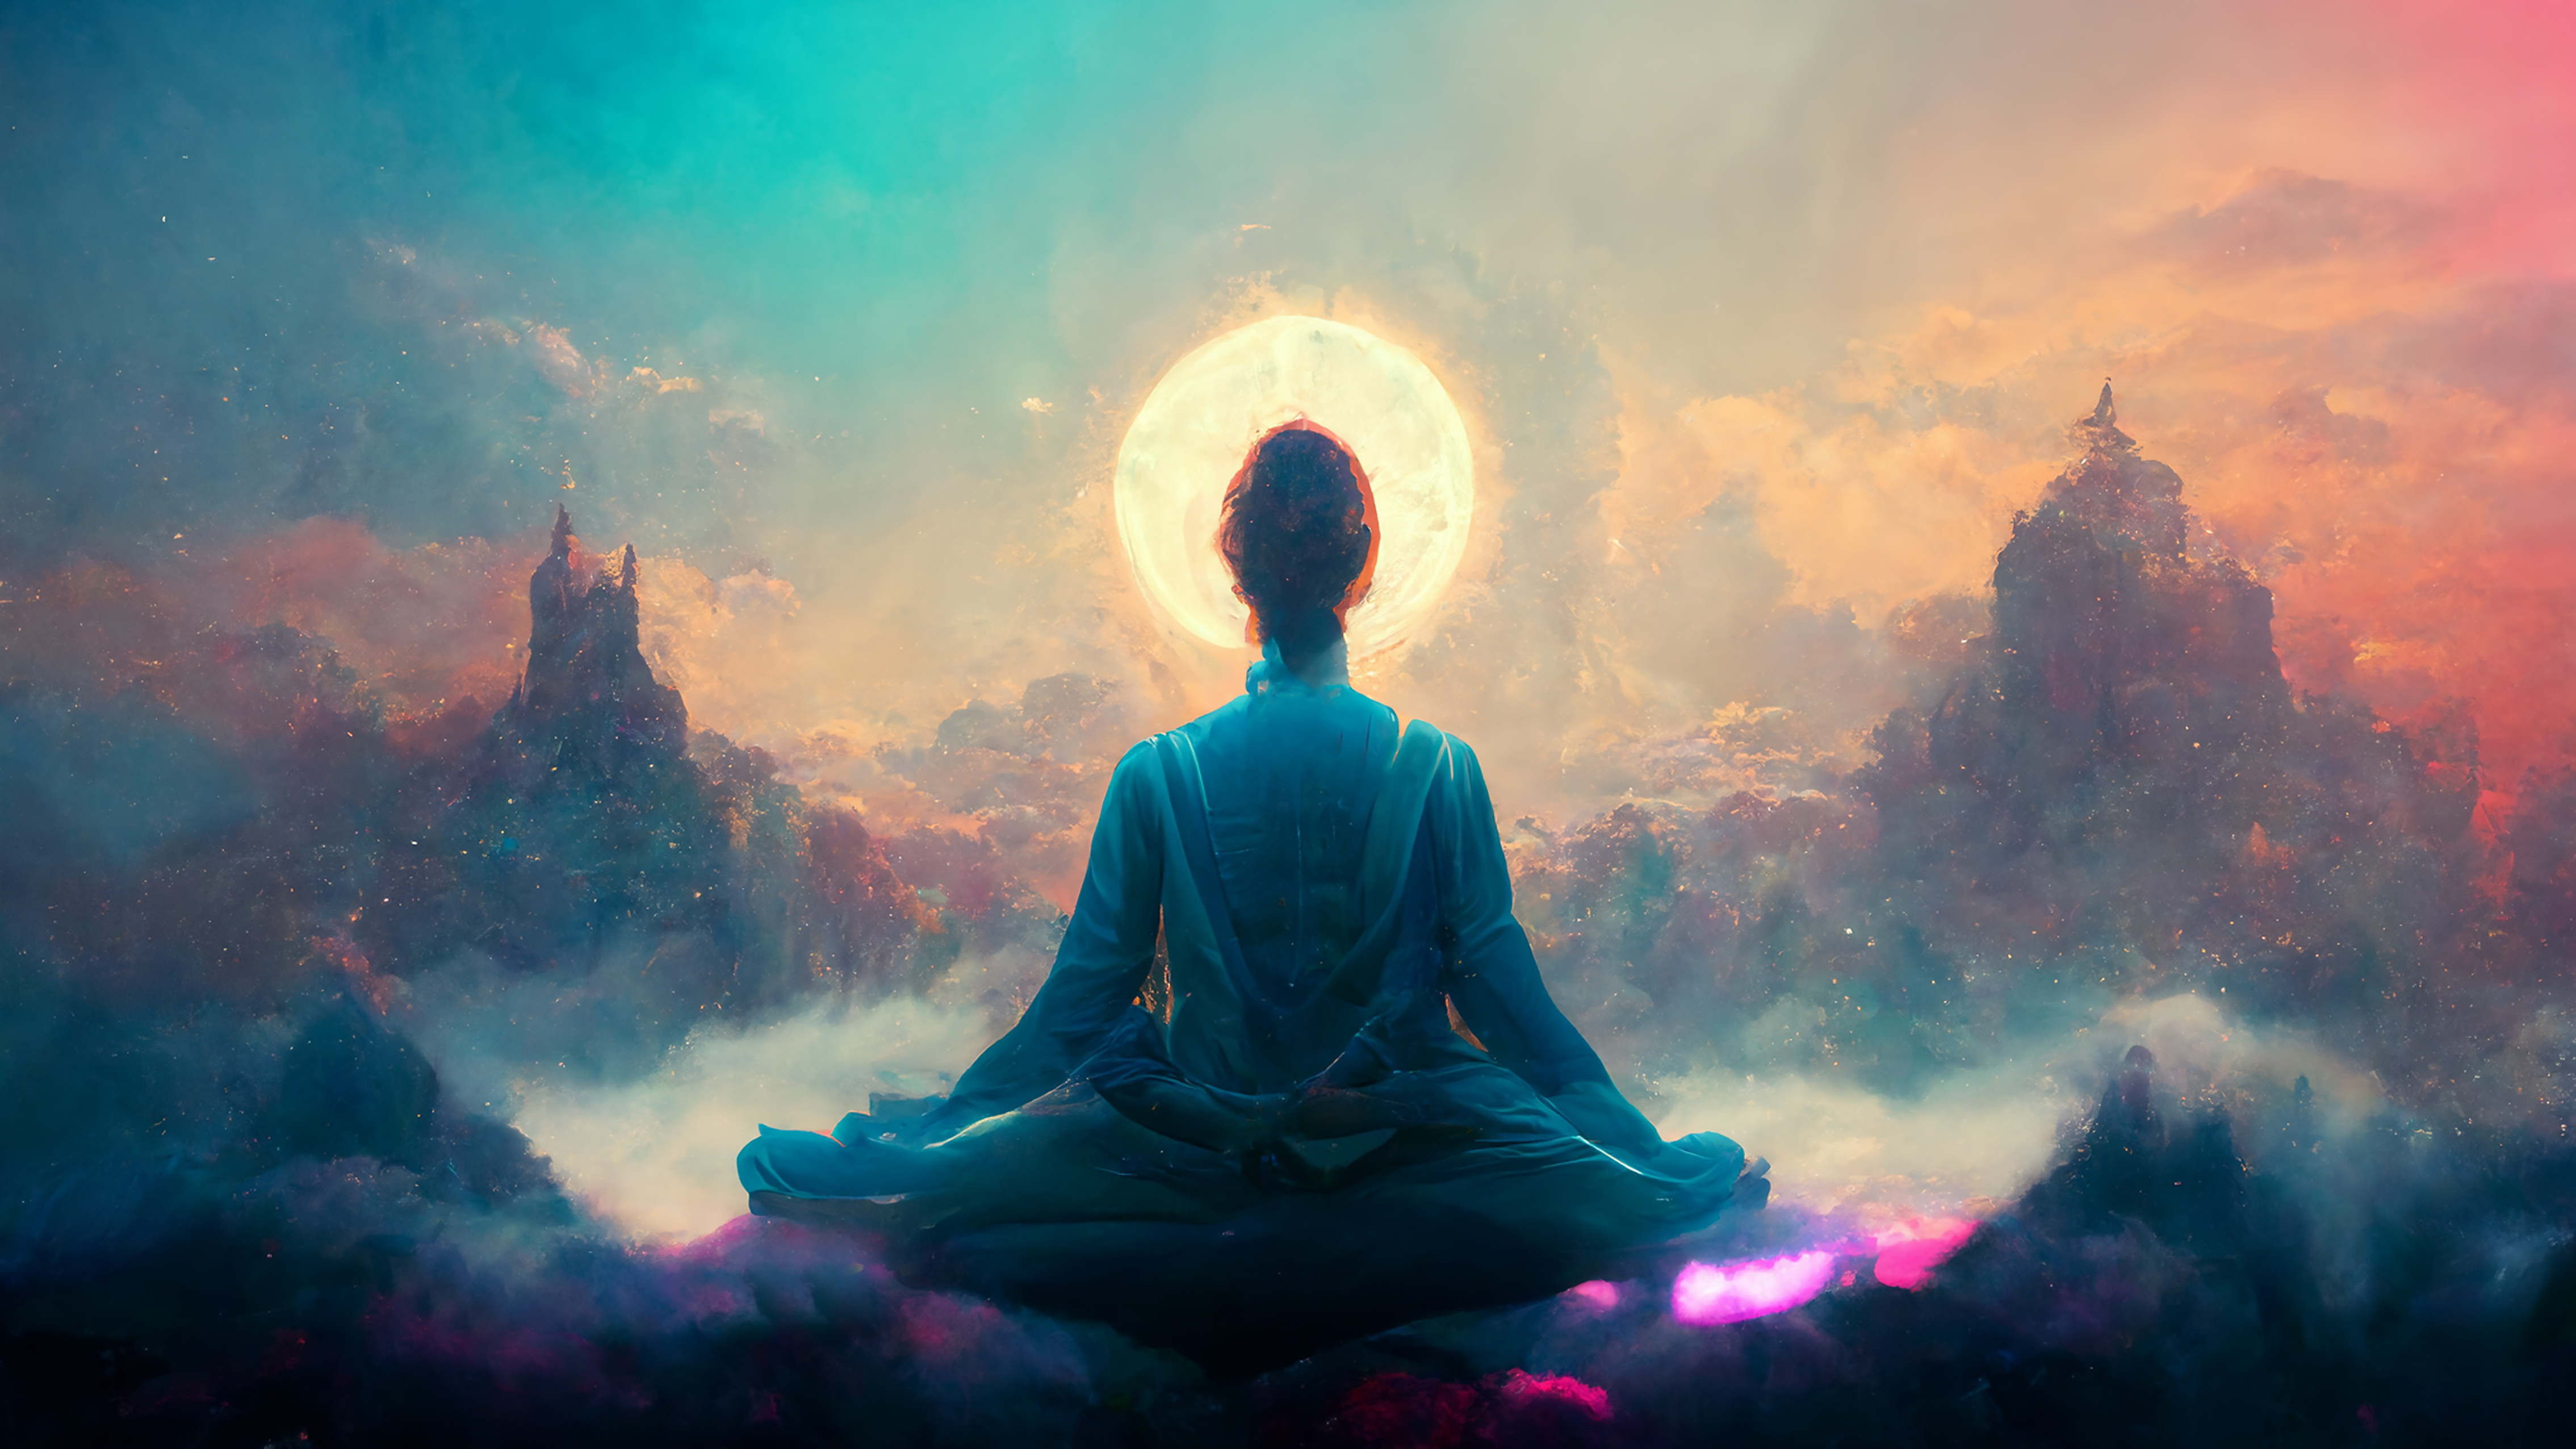 Meditation Stock Photos Images and Backgrounds for Free Download